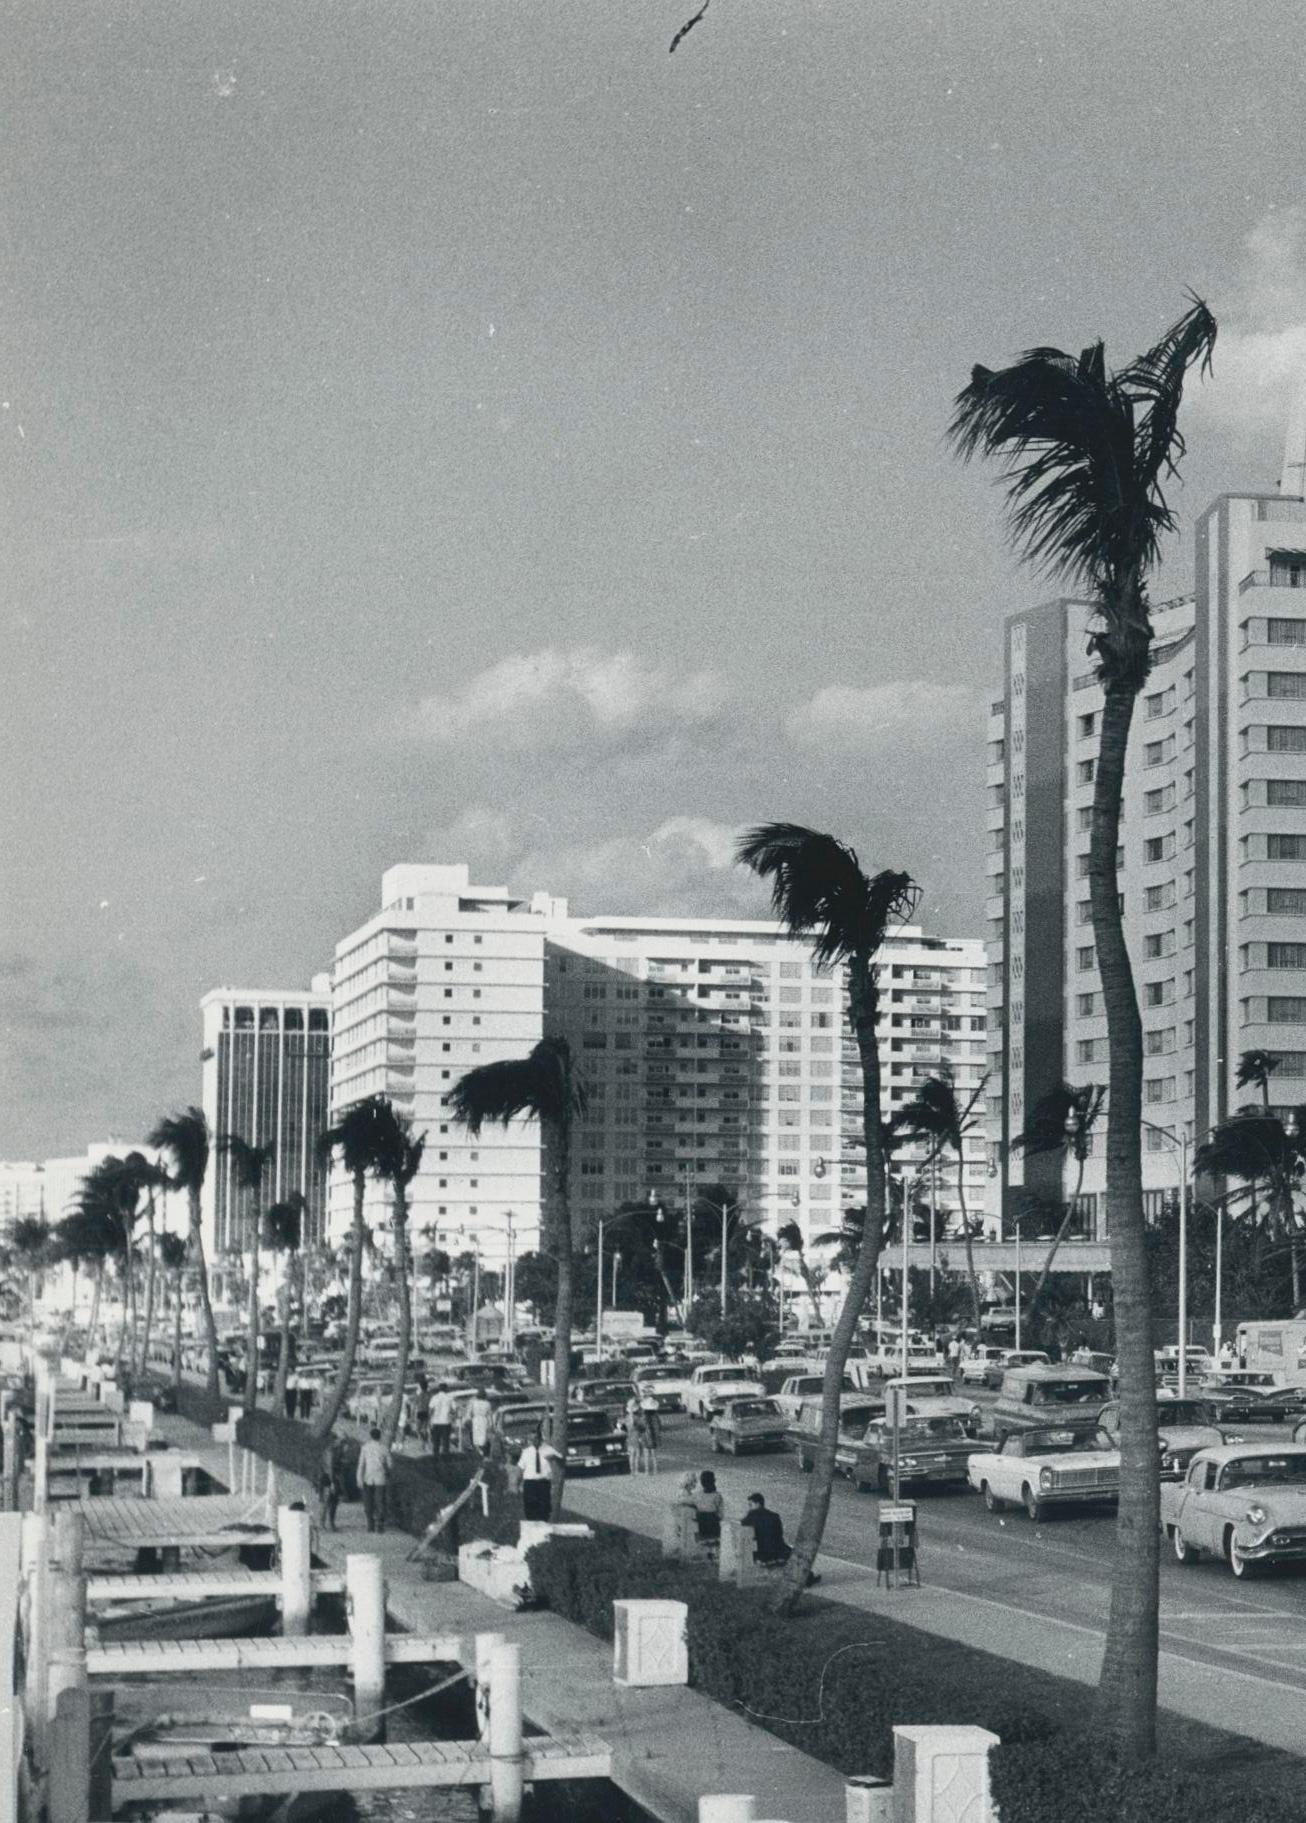 Miami Beach, Street photography, Black and White, USA 1960s, 18, 2 x 23, 3 cm - Photograph by Erich Andres